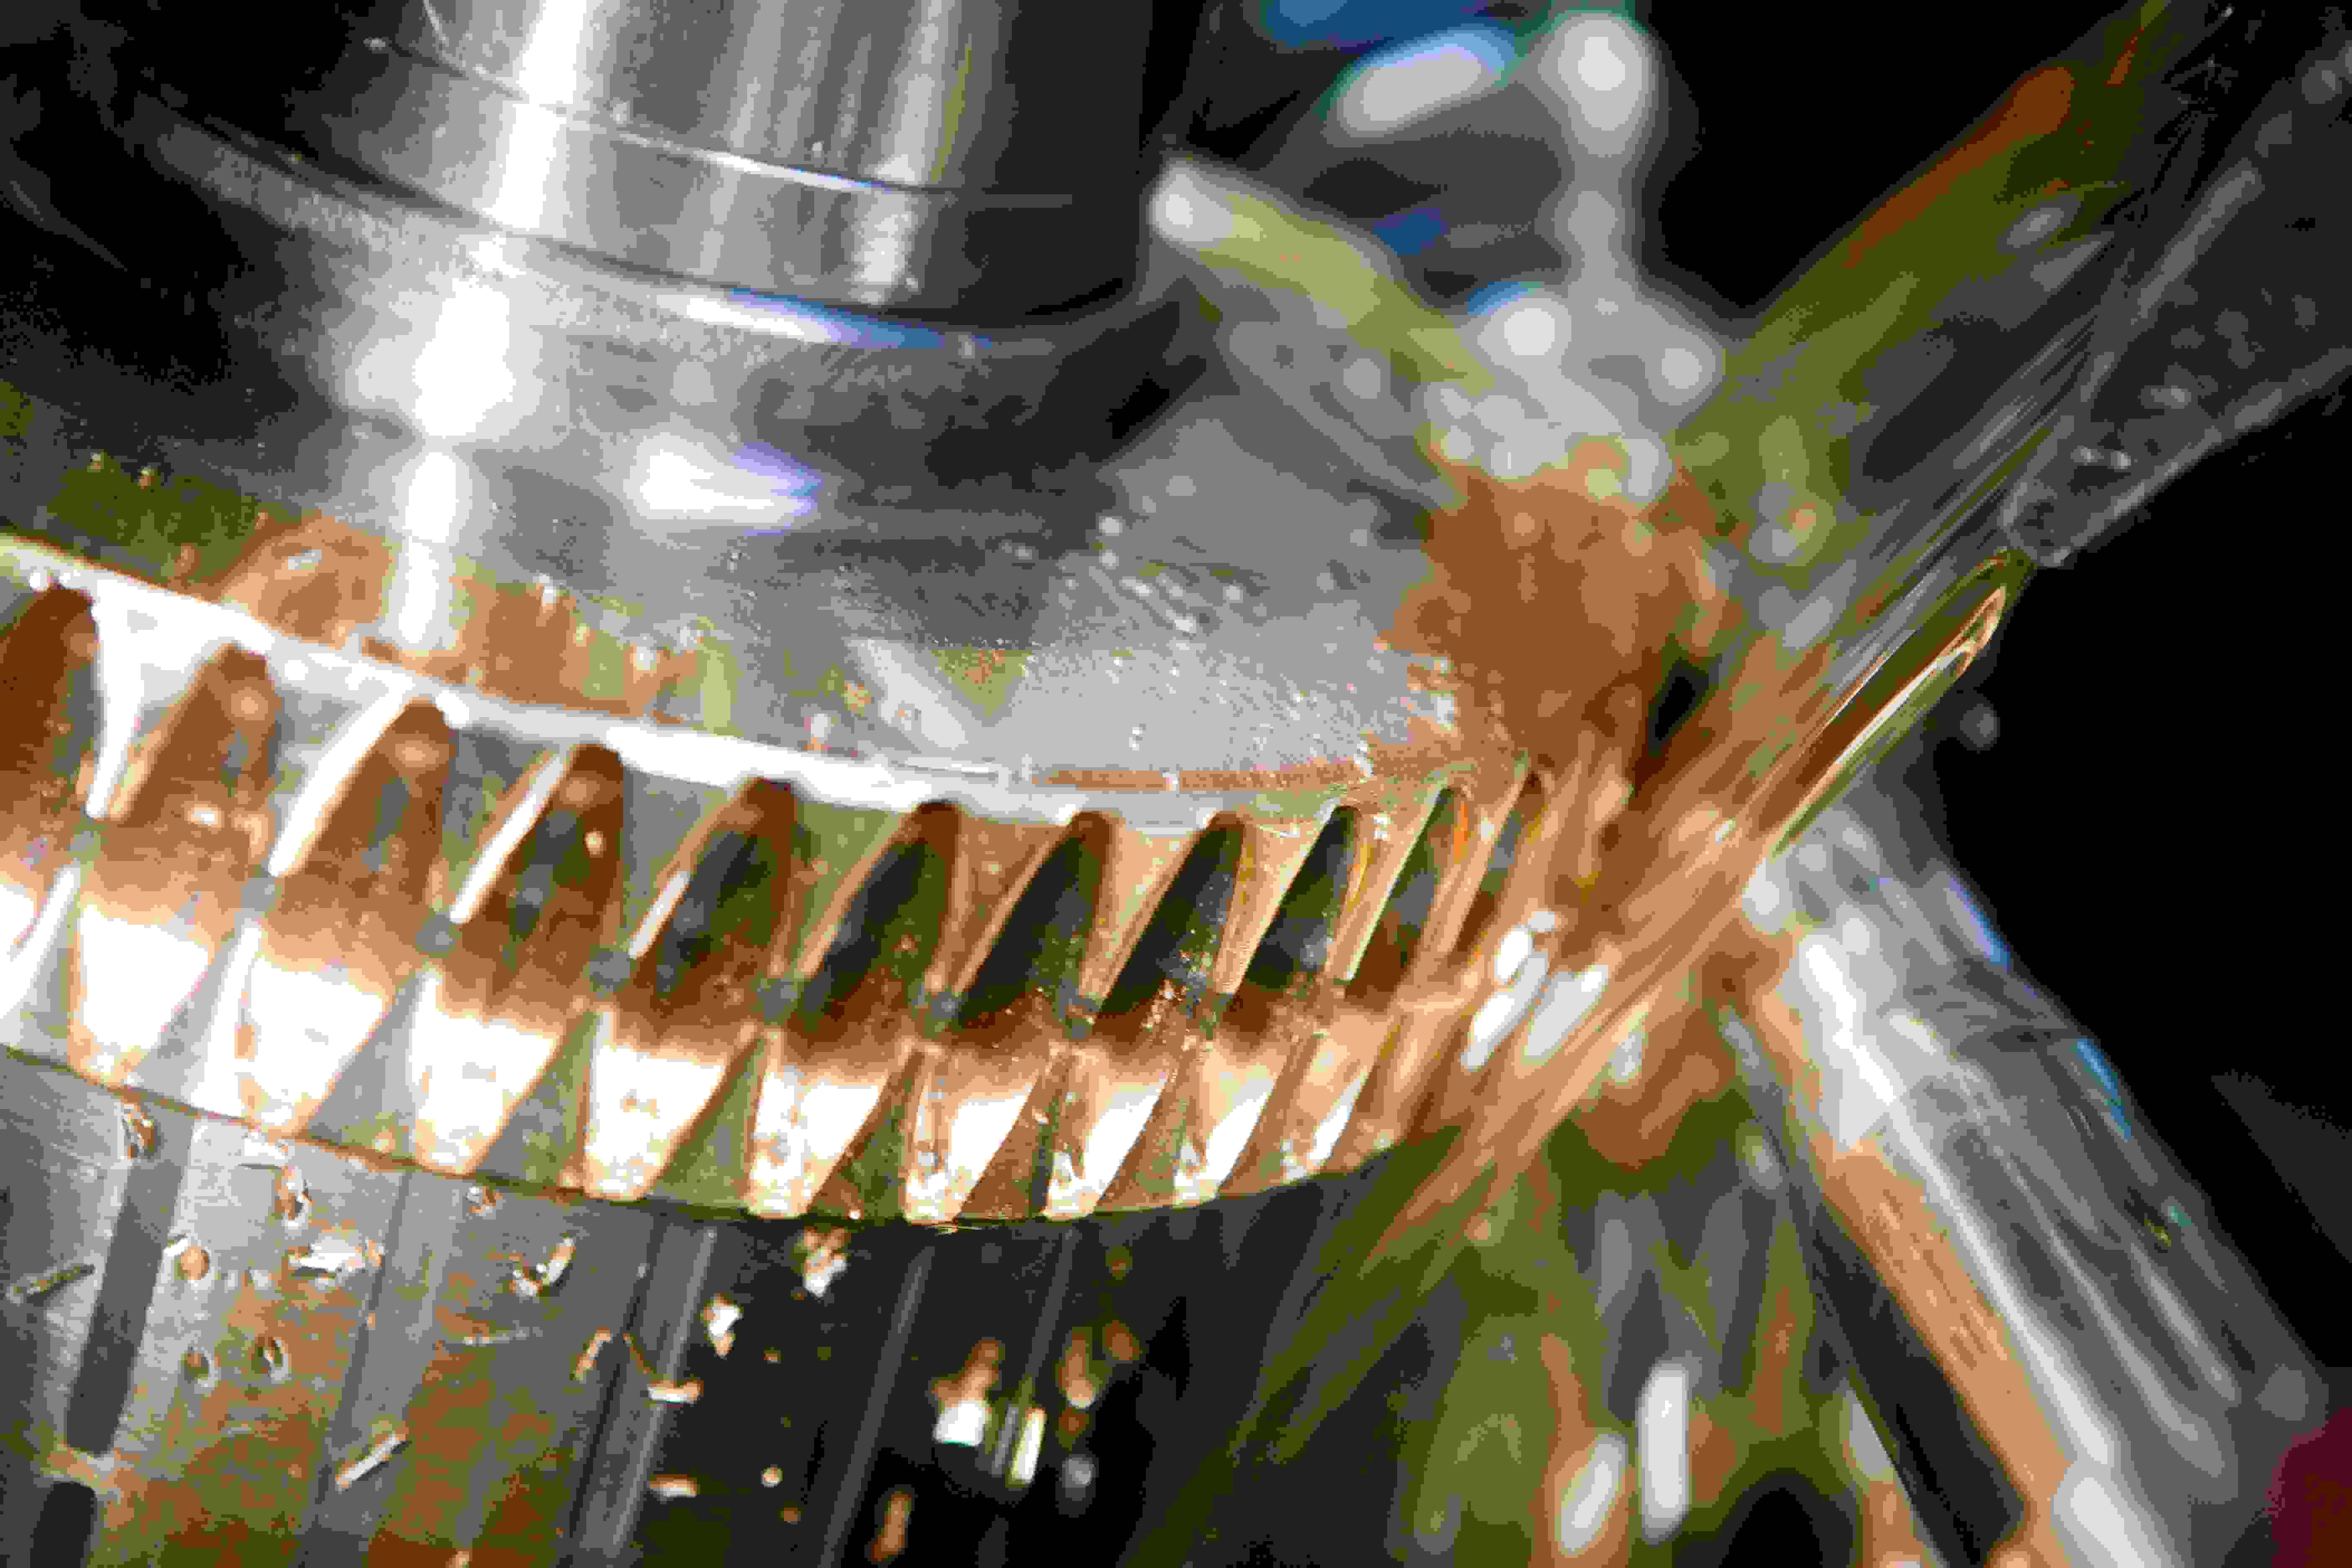 Gears are lubricated with oil